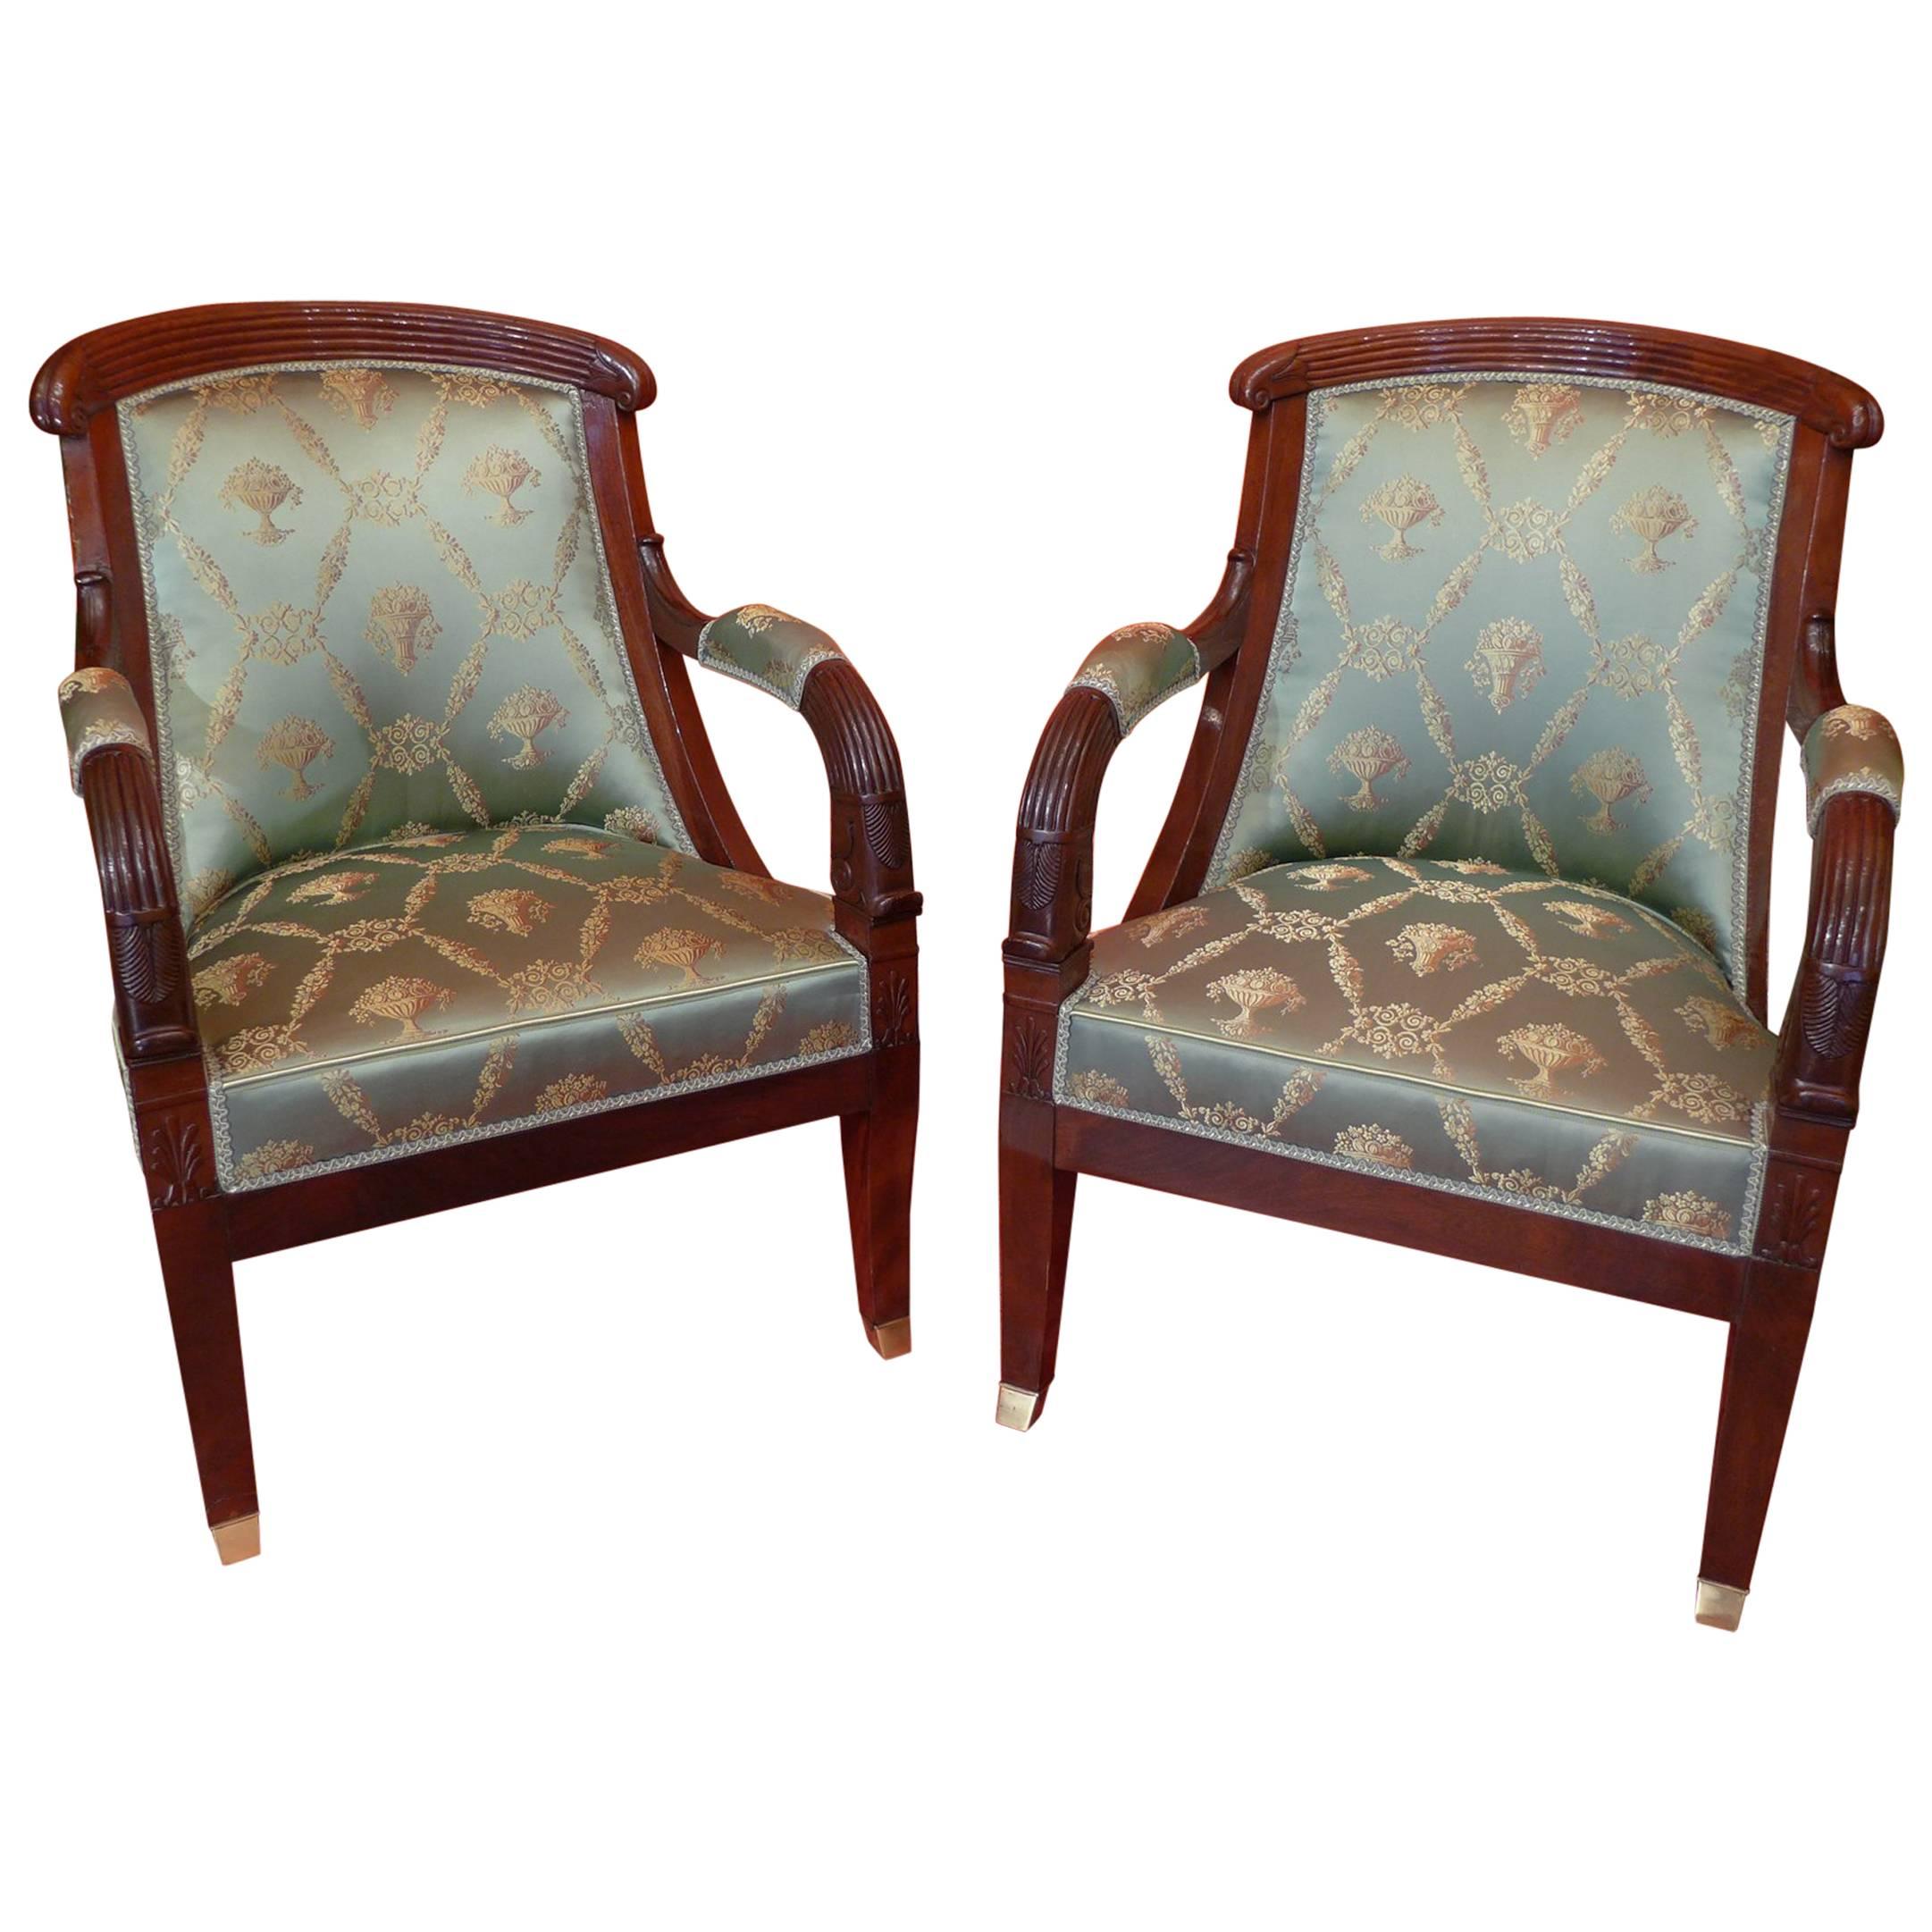 French Large Pair of Early-19th Century Empire Period Mahogany Armchairs For Sale